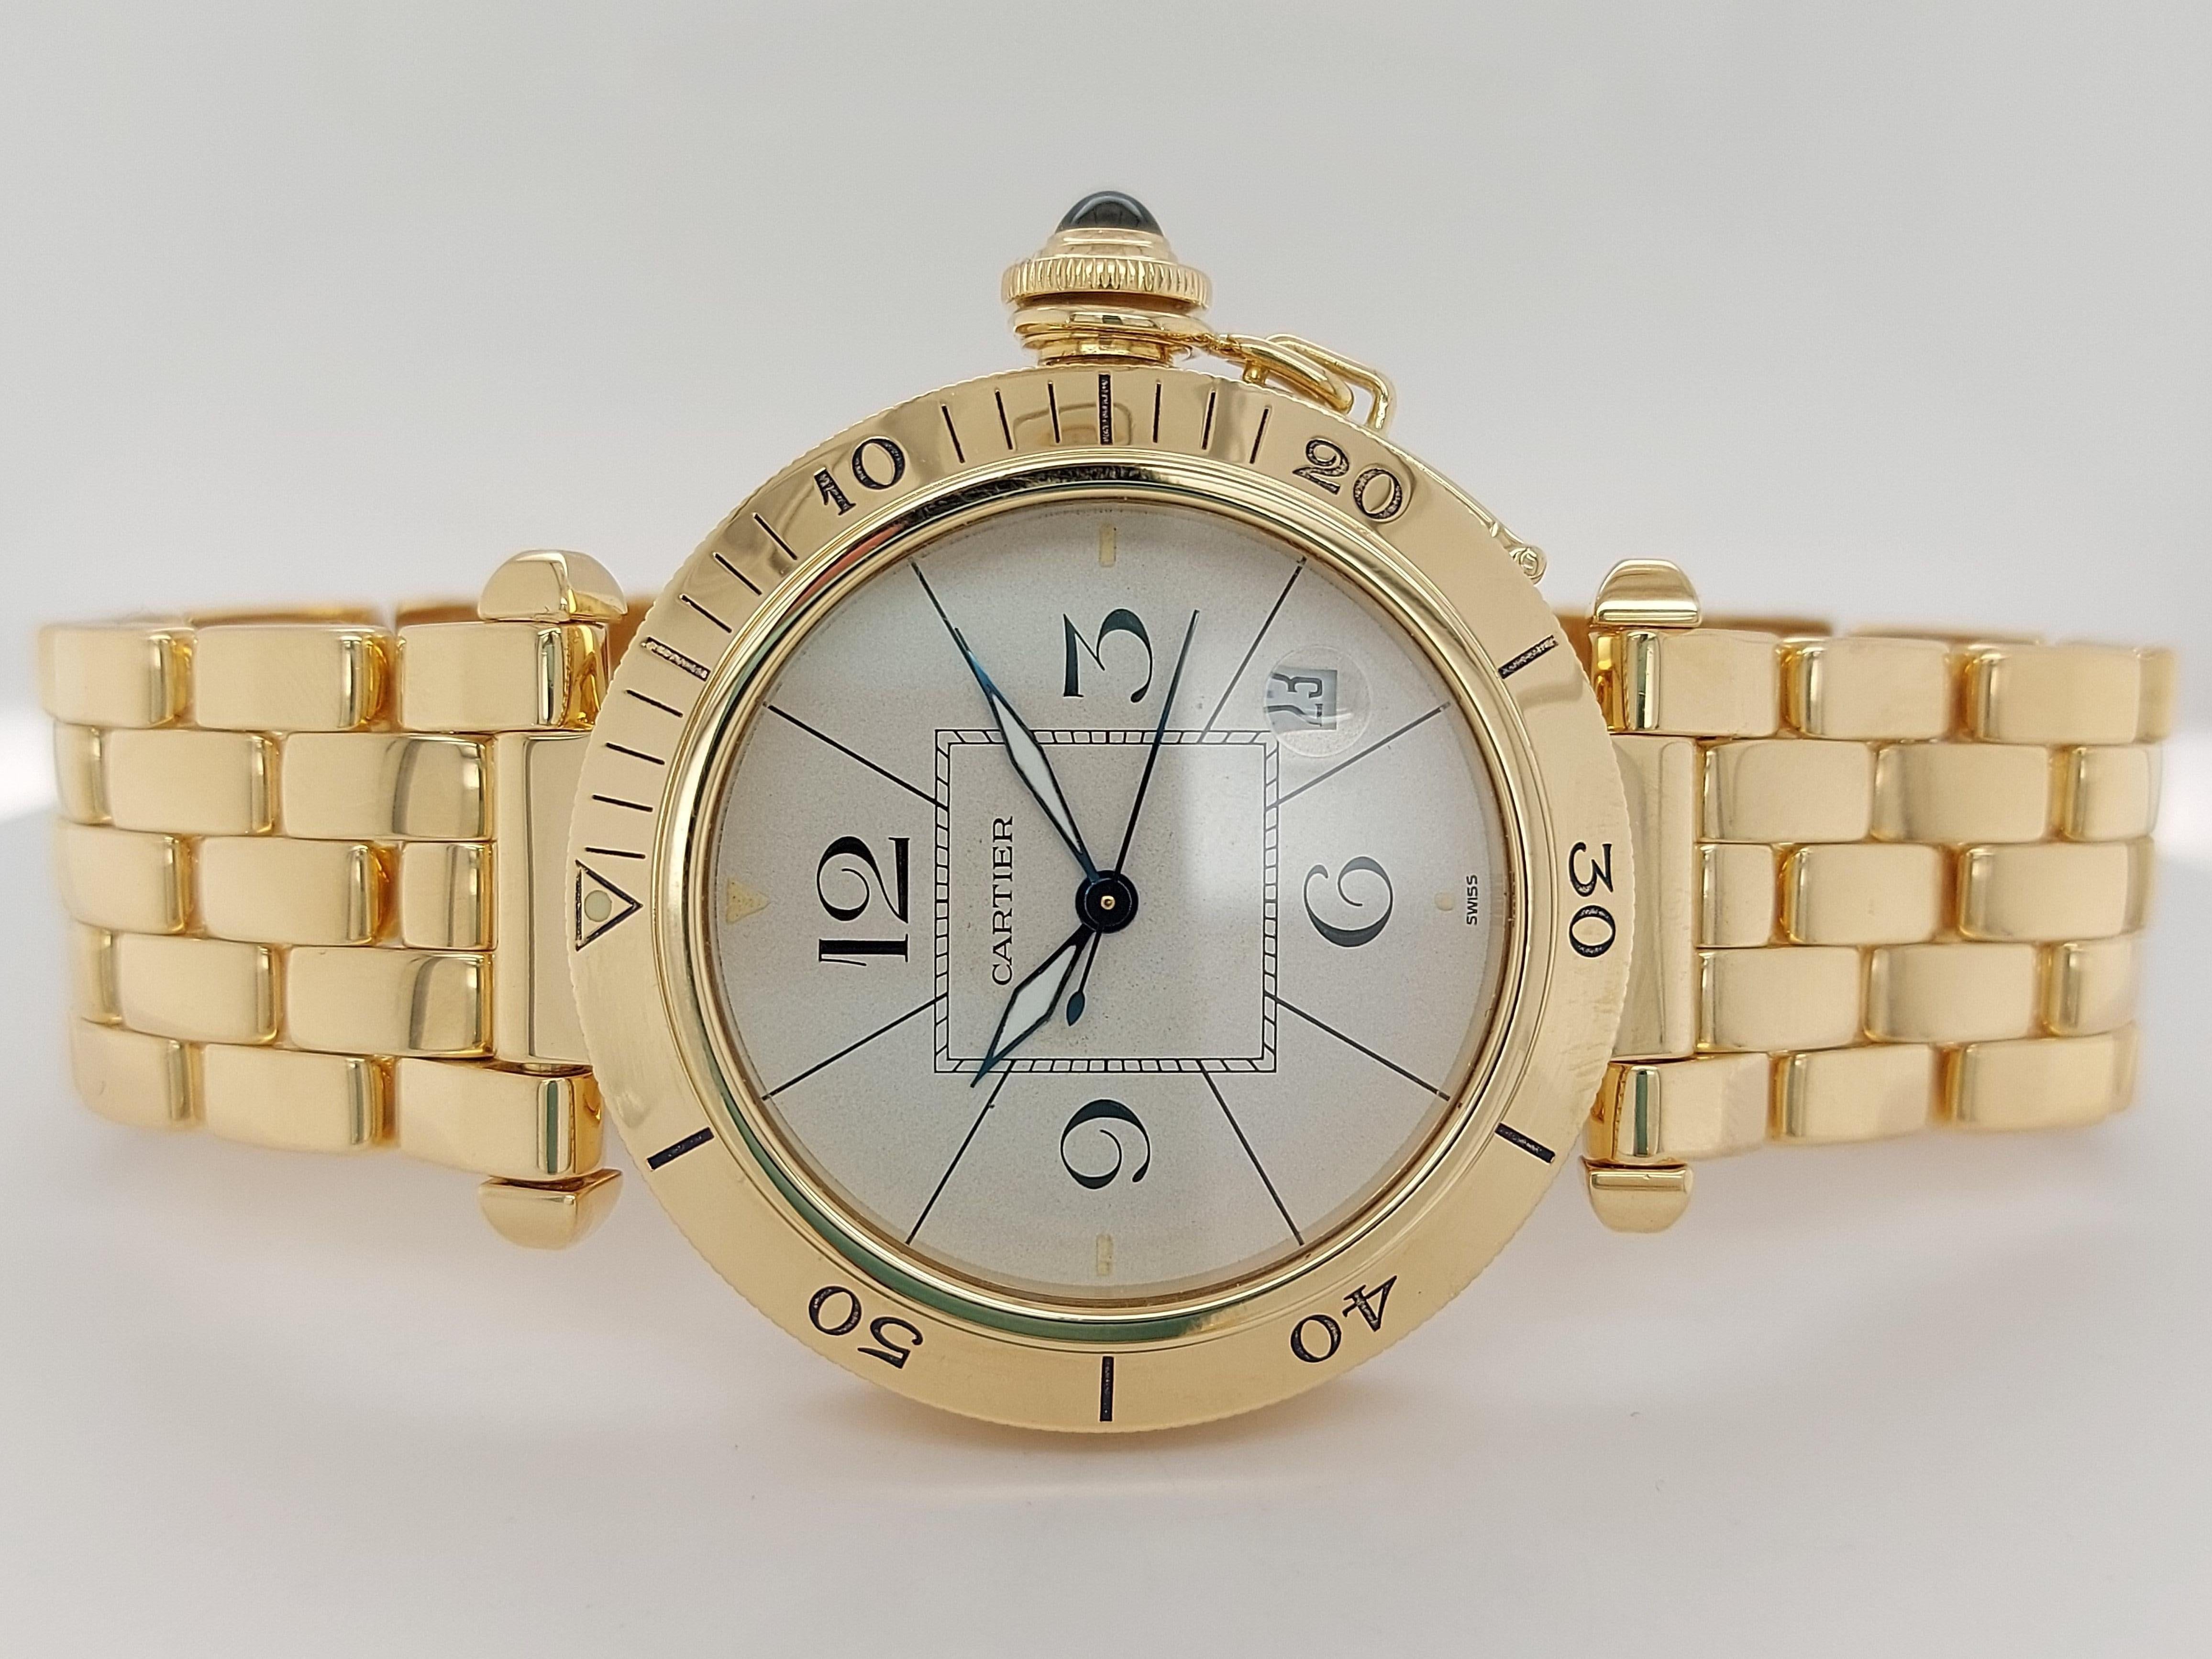 18 Kt Yellow Gold Cartier Pasha, Automatic, Diameter 38 mm With box and papers

Serial number: 820907/98

Movement: Mechanical with Automatic, Self winding

Functions: hours, minutes, seconds, magnified date window between the 4 and the 5